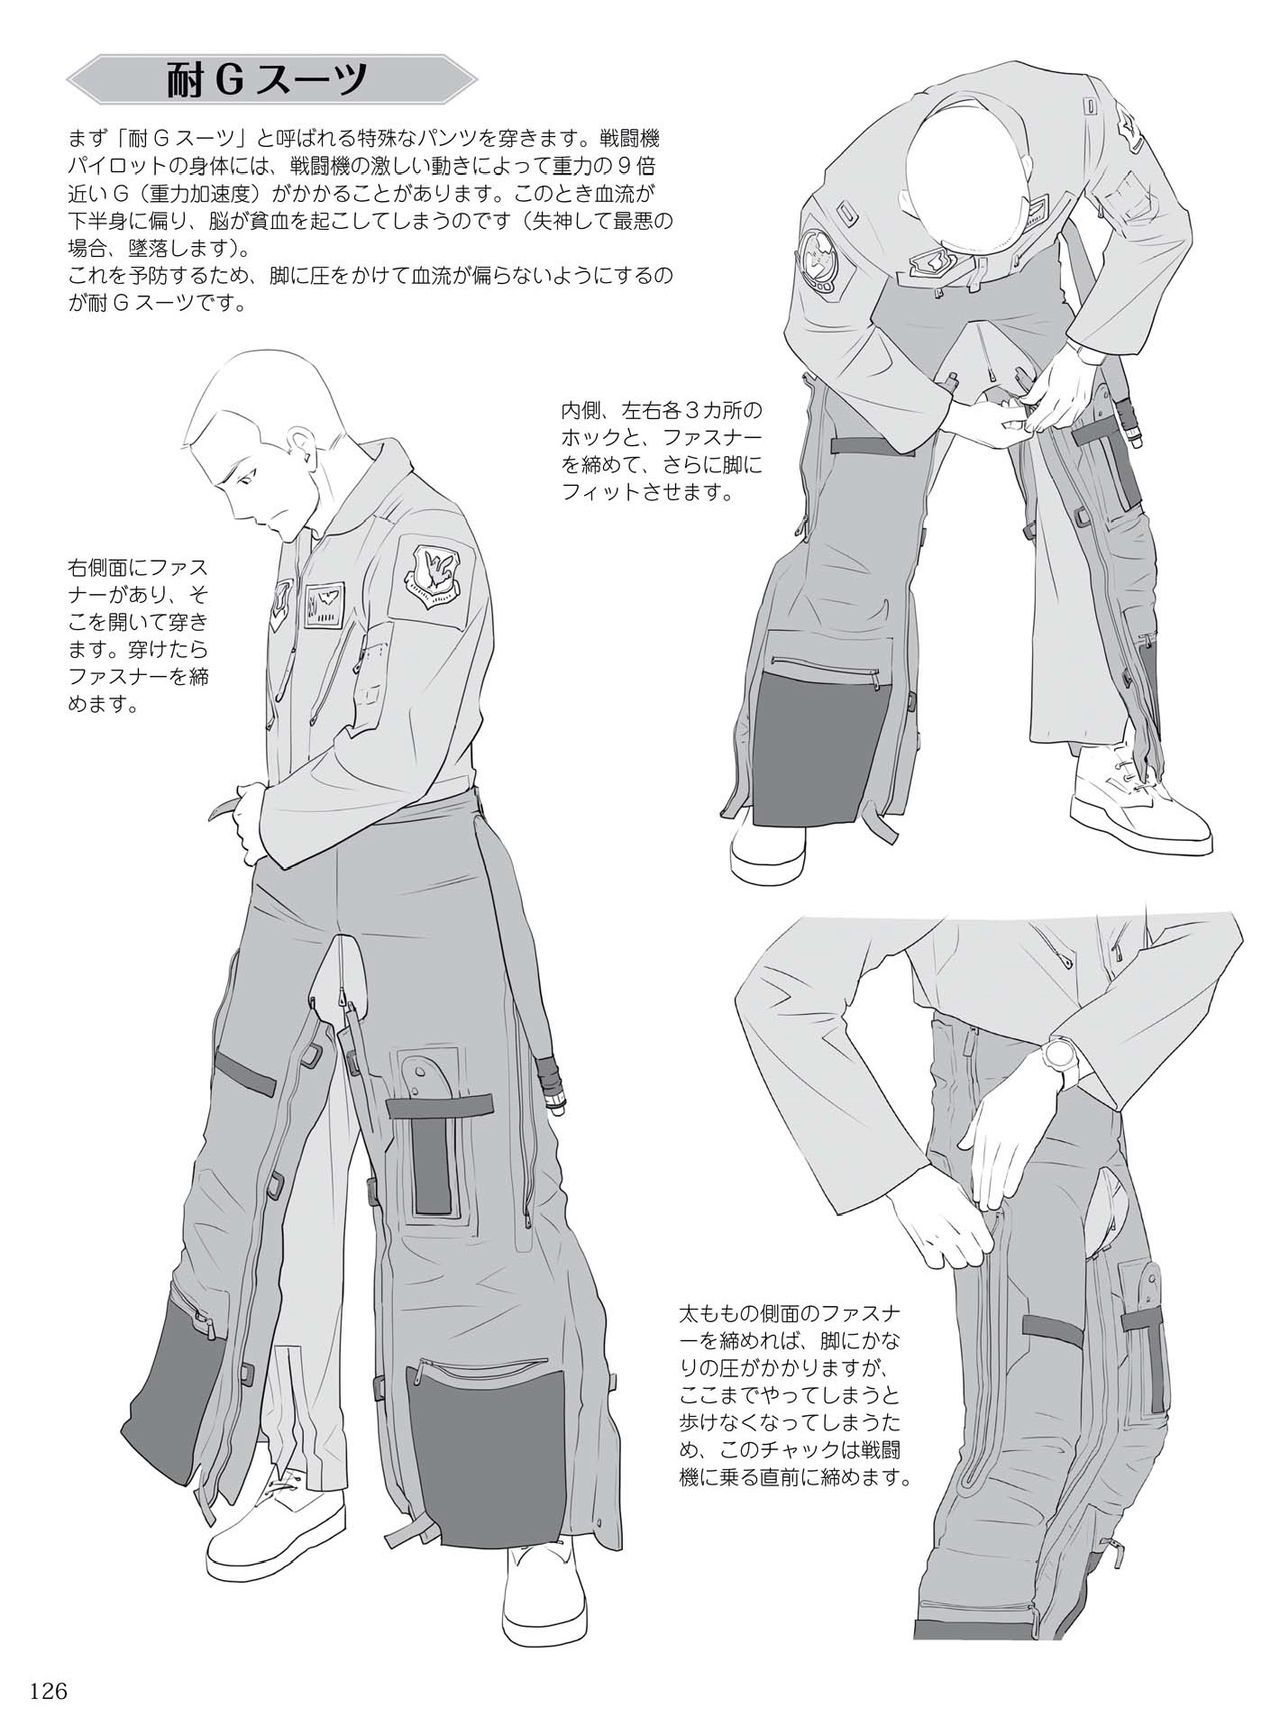 How to draw military uniforms and uniforms From Self-Defense Forces 軍服・制服の描き方 アメリカ軍・自衛隊の制服から戦闘服まで 129